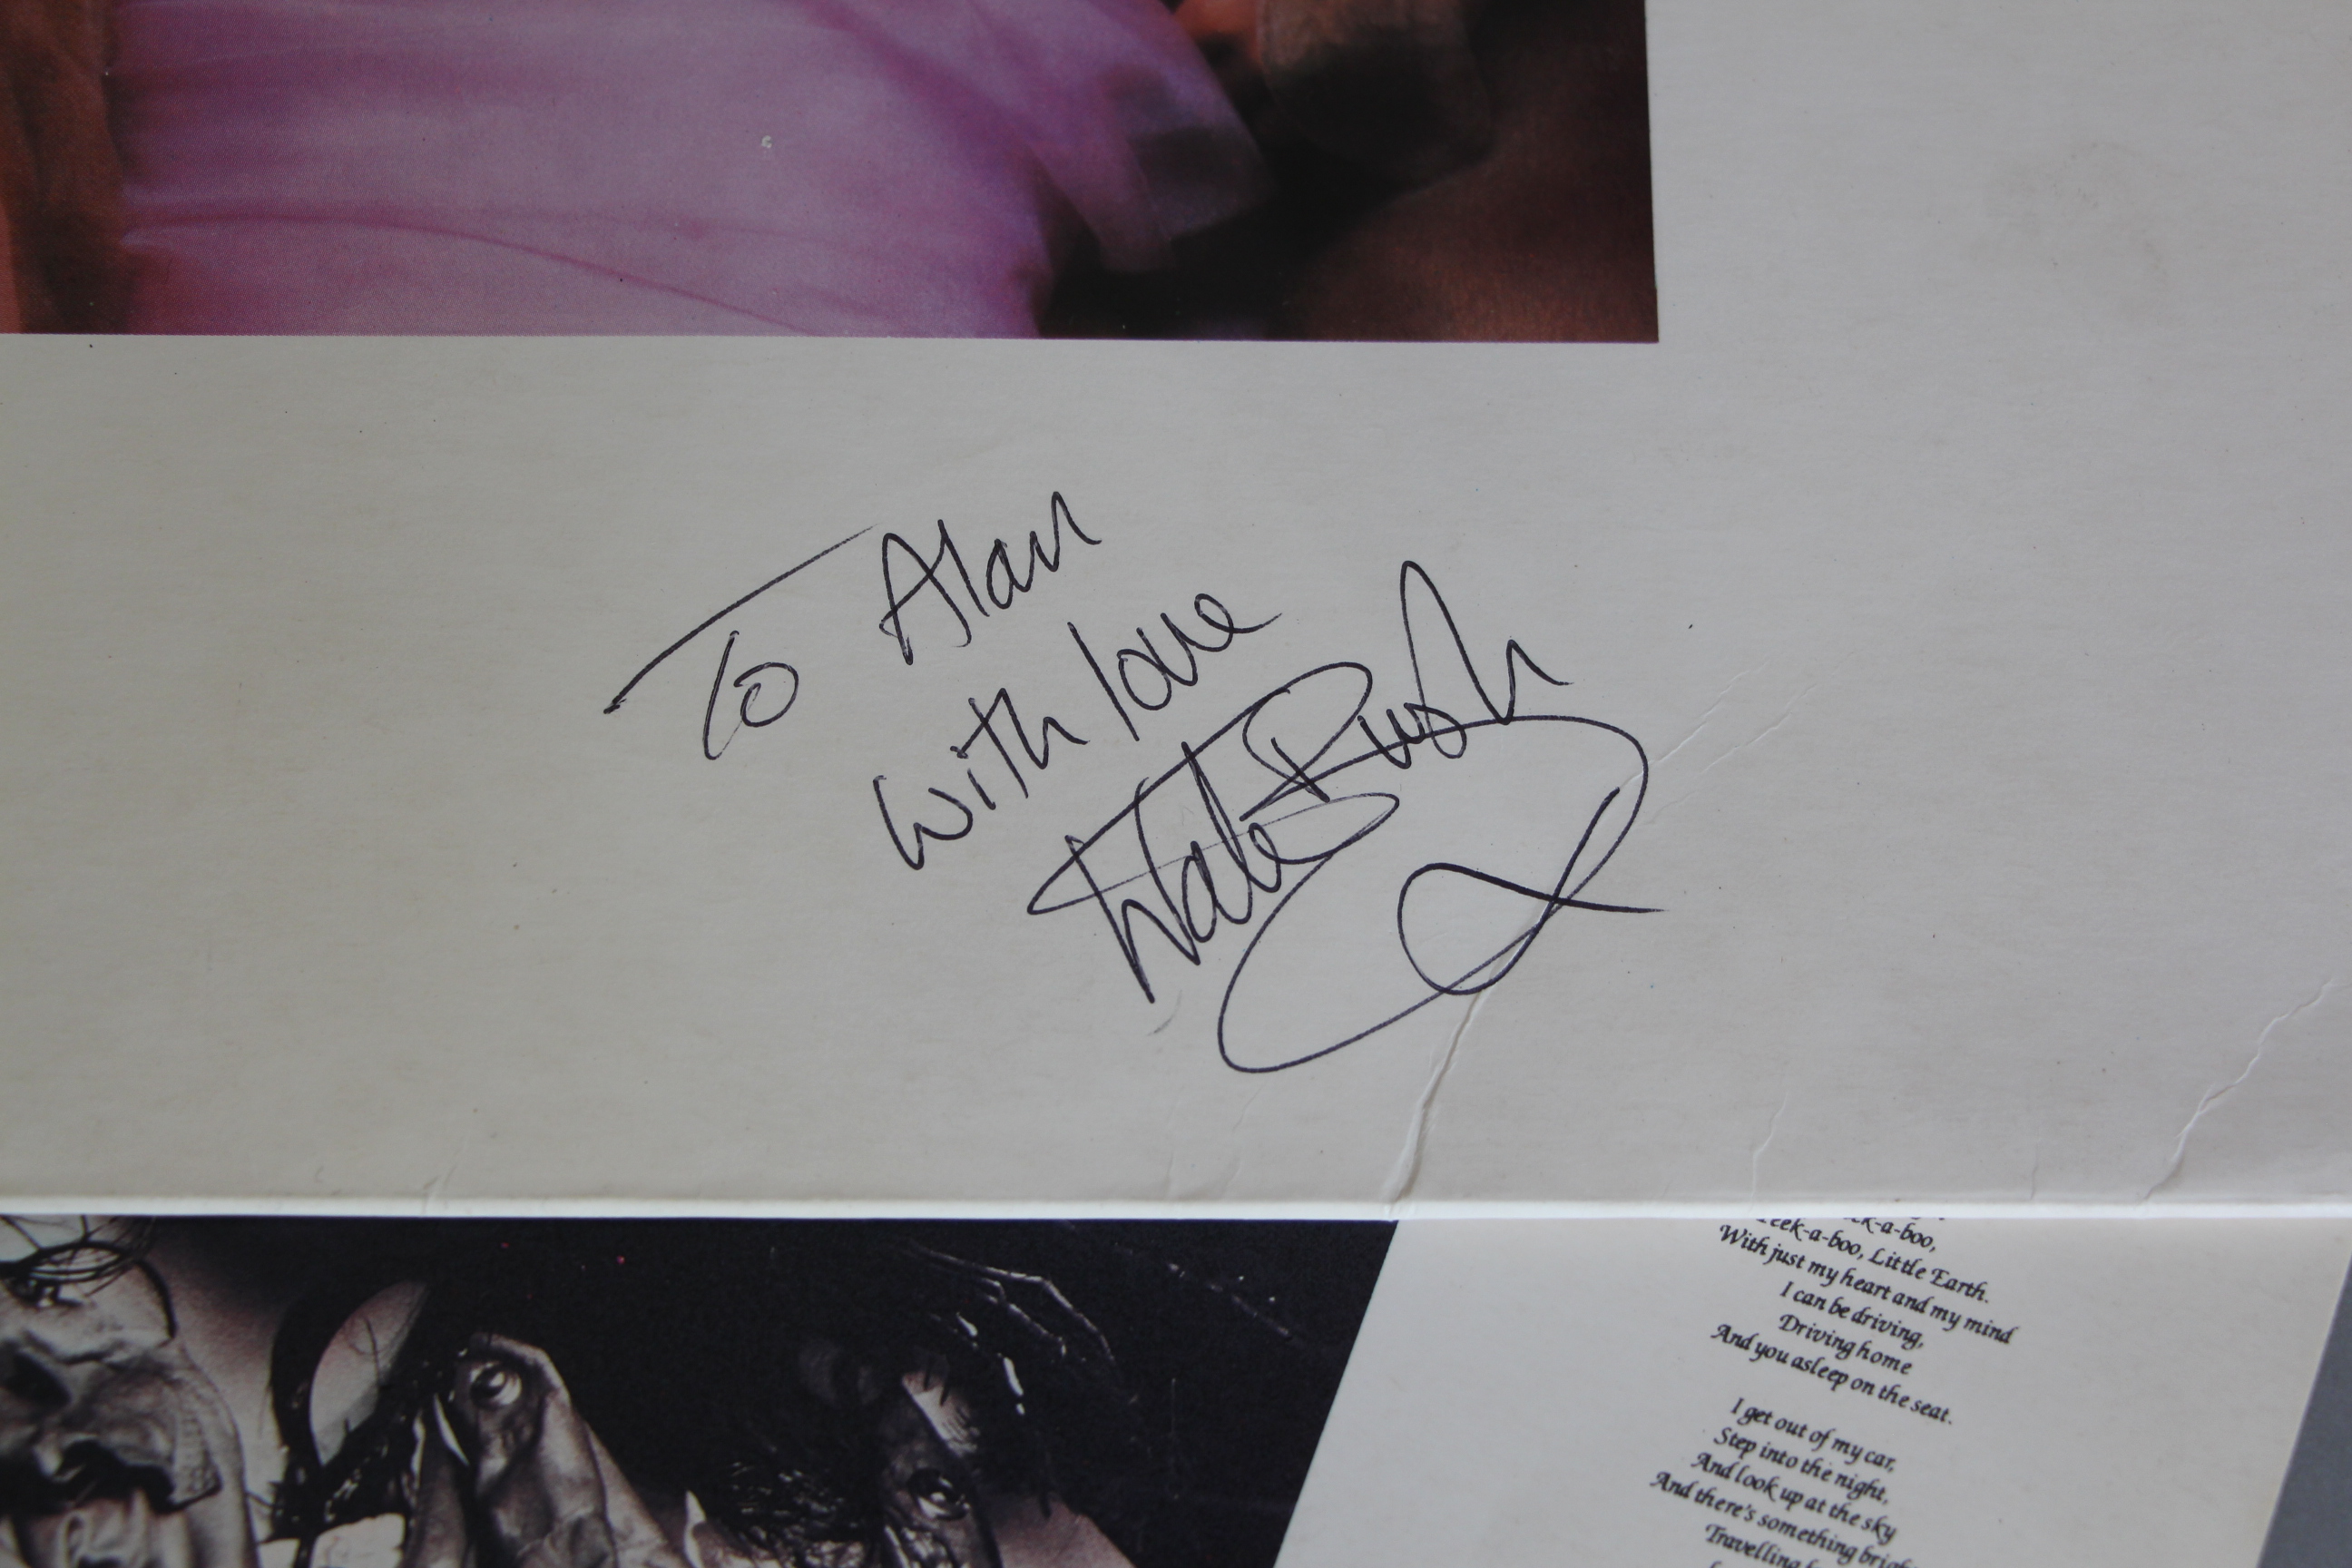 3 signed LPs - Siouxsie & the Banshees "Through the Looking Glass" signed in HMV Oxford street, - Image 2 of 4